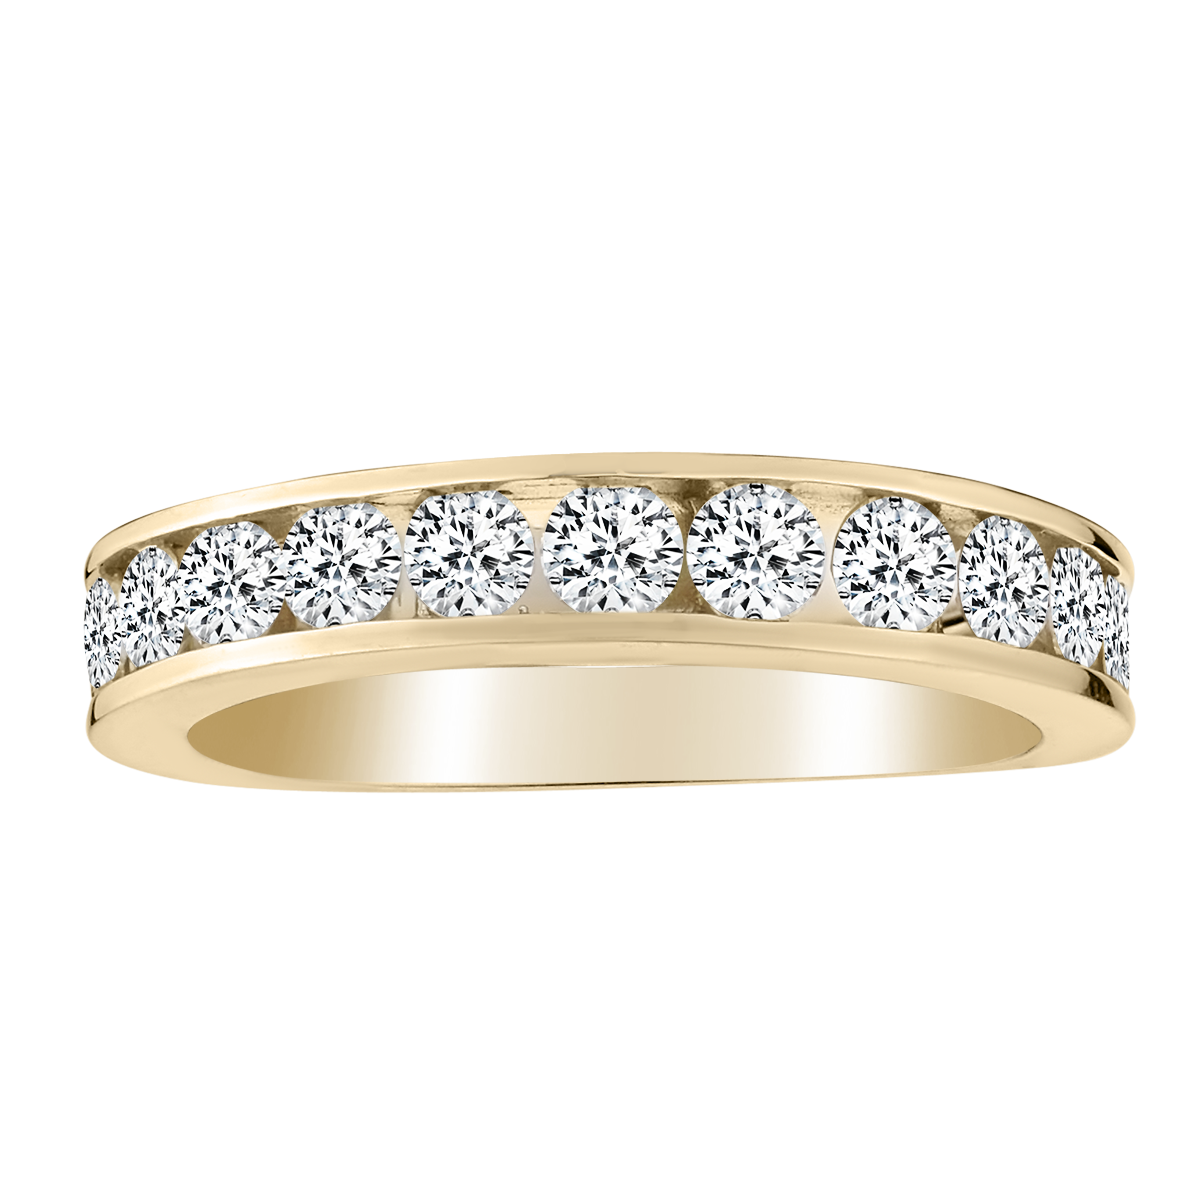 1.00 Carat of Diamonds Band Ring, 10kt Yellow Gold......................NOW